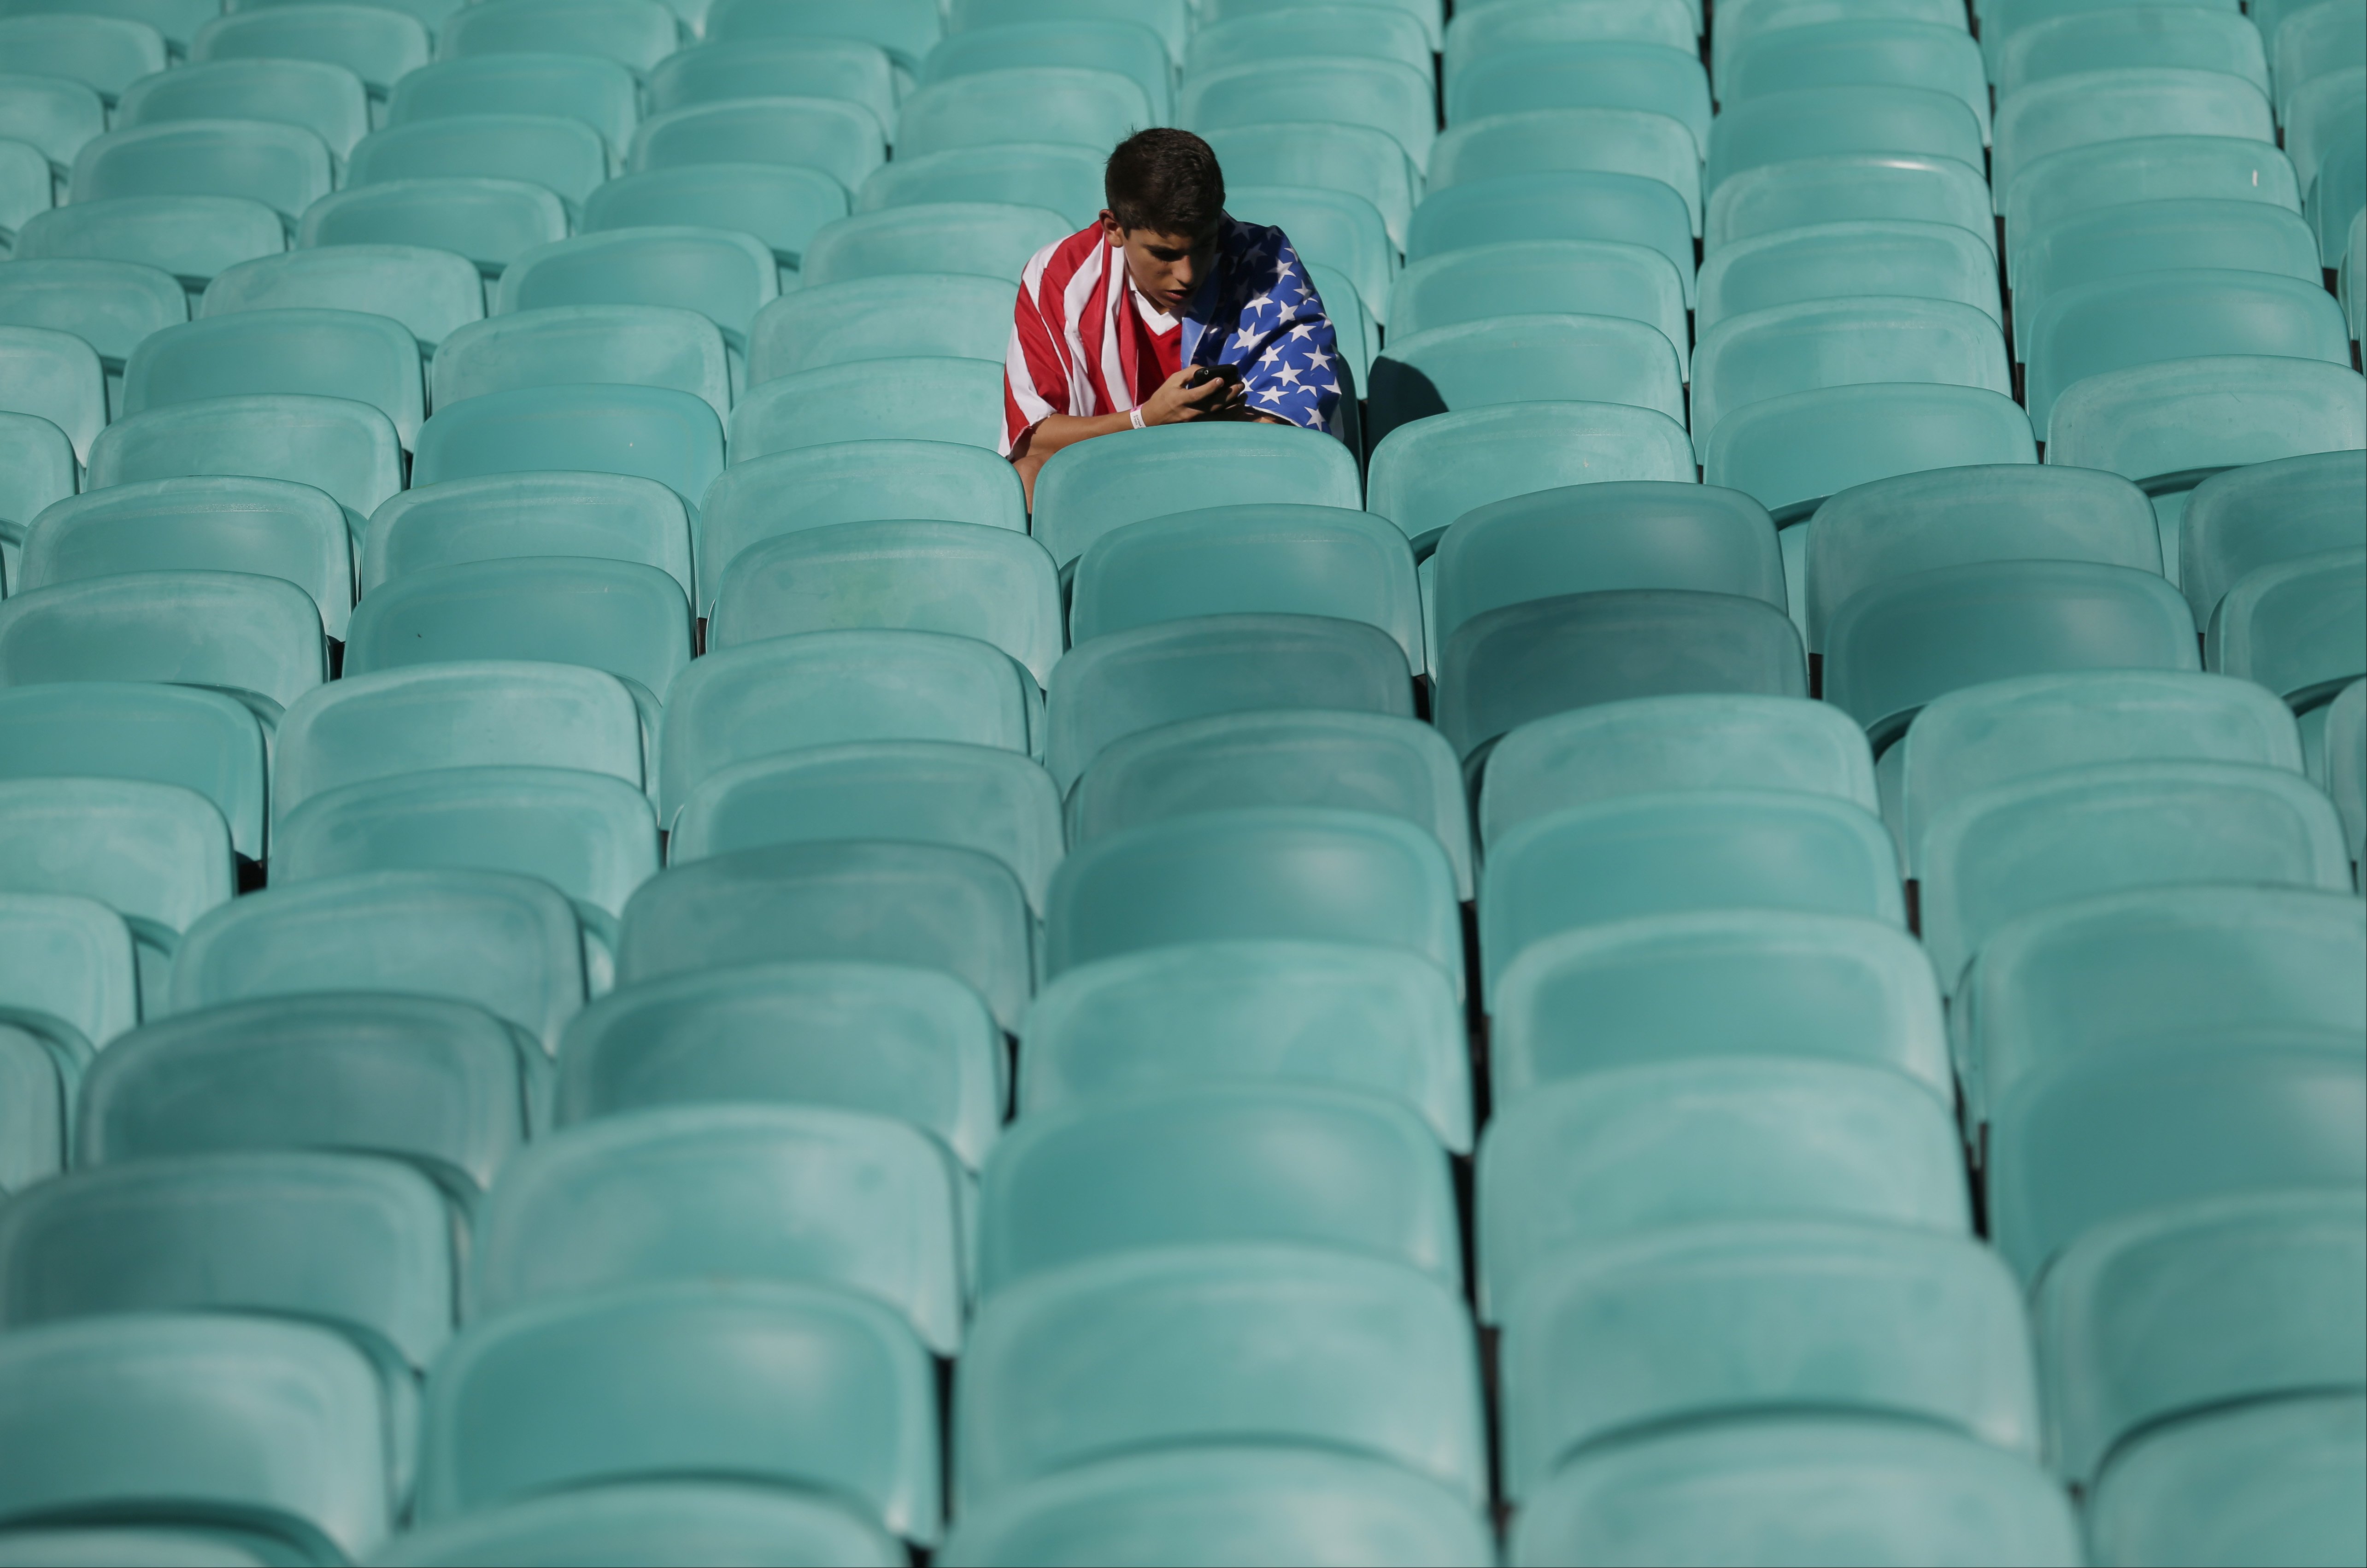 A US fan waits for the beginning of the match between Belgium and the USA at the Arena Fonte Nova in Salvador, Brazil on July 1, 2014.